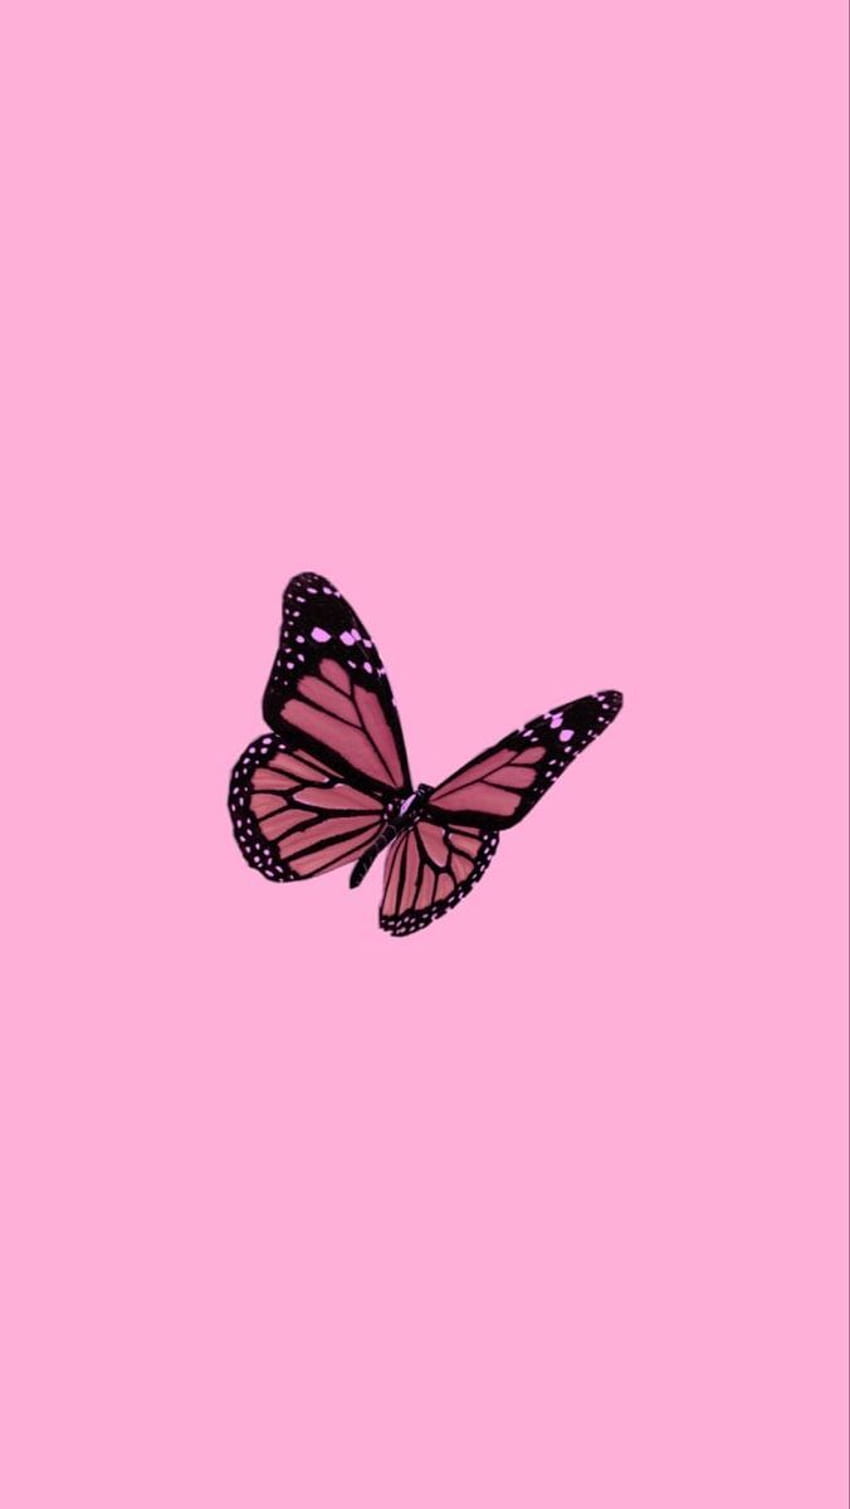 Pink butterfly wallpaper background aesthetic for phone - Profile picture, TikTok